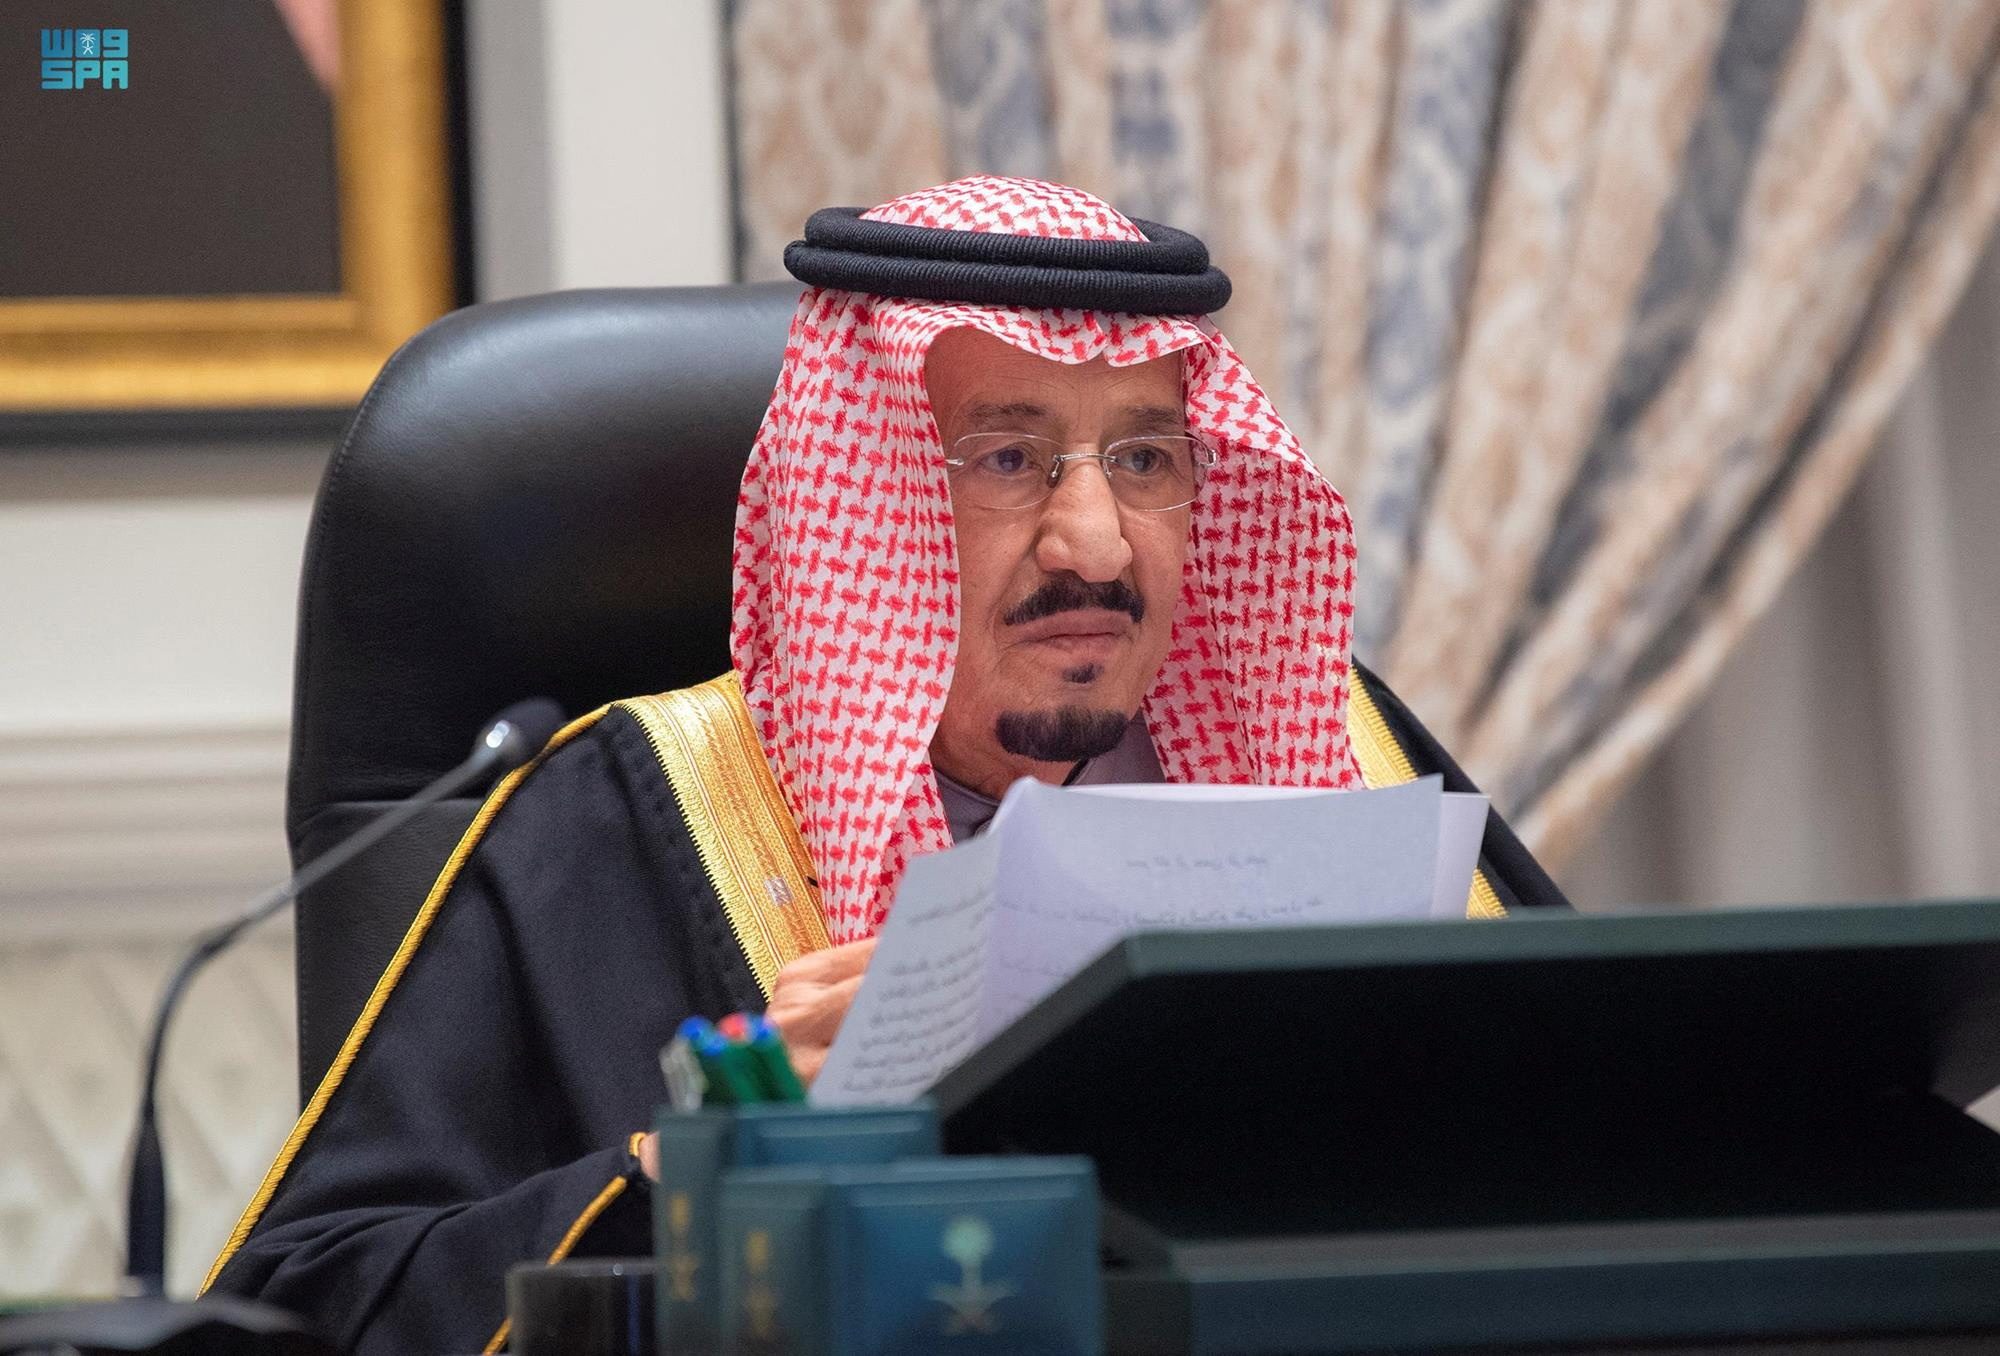 Saudi Arabia expects 2022 budget surplus after years of deficit